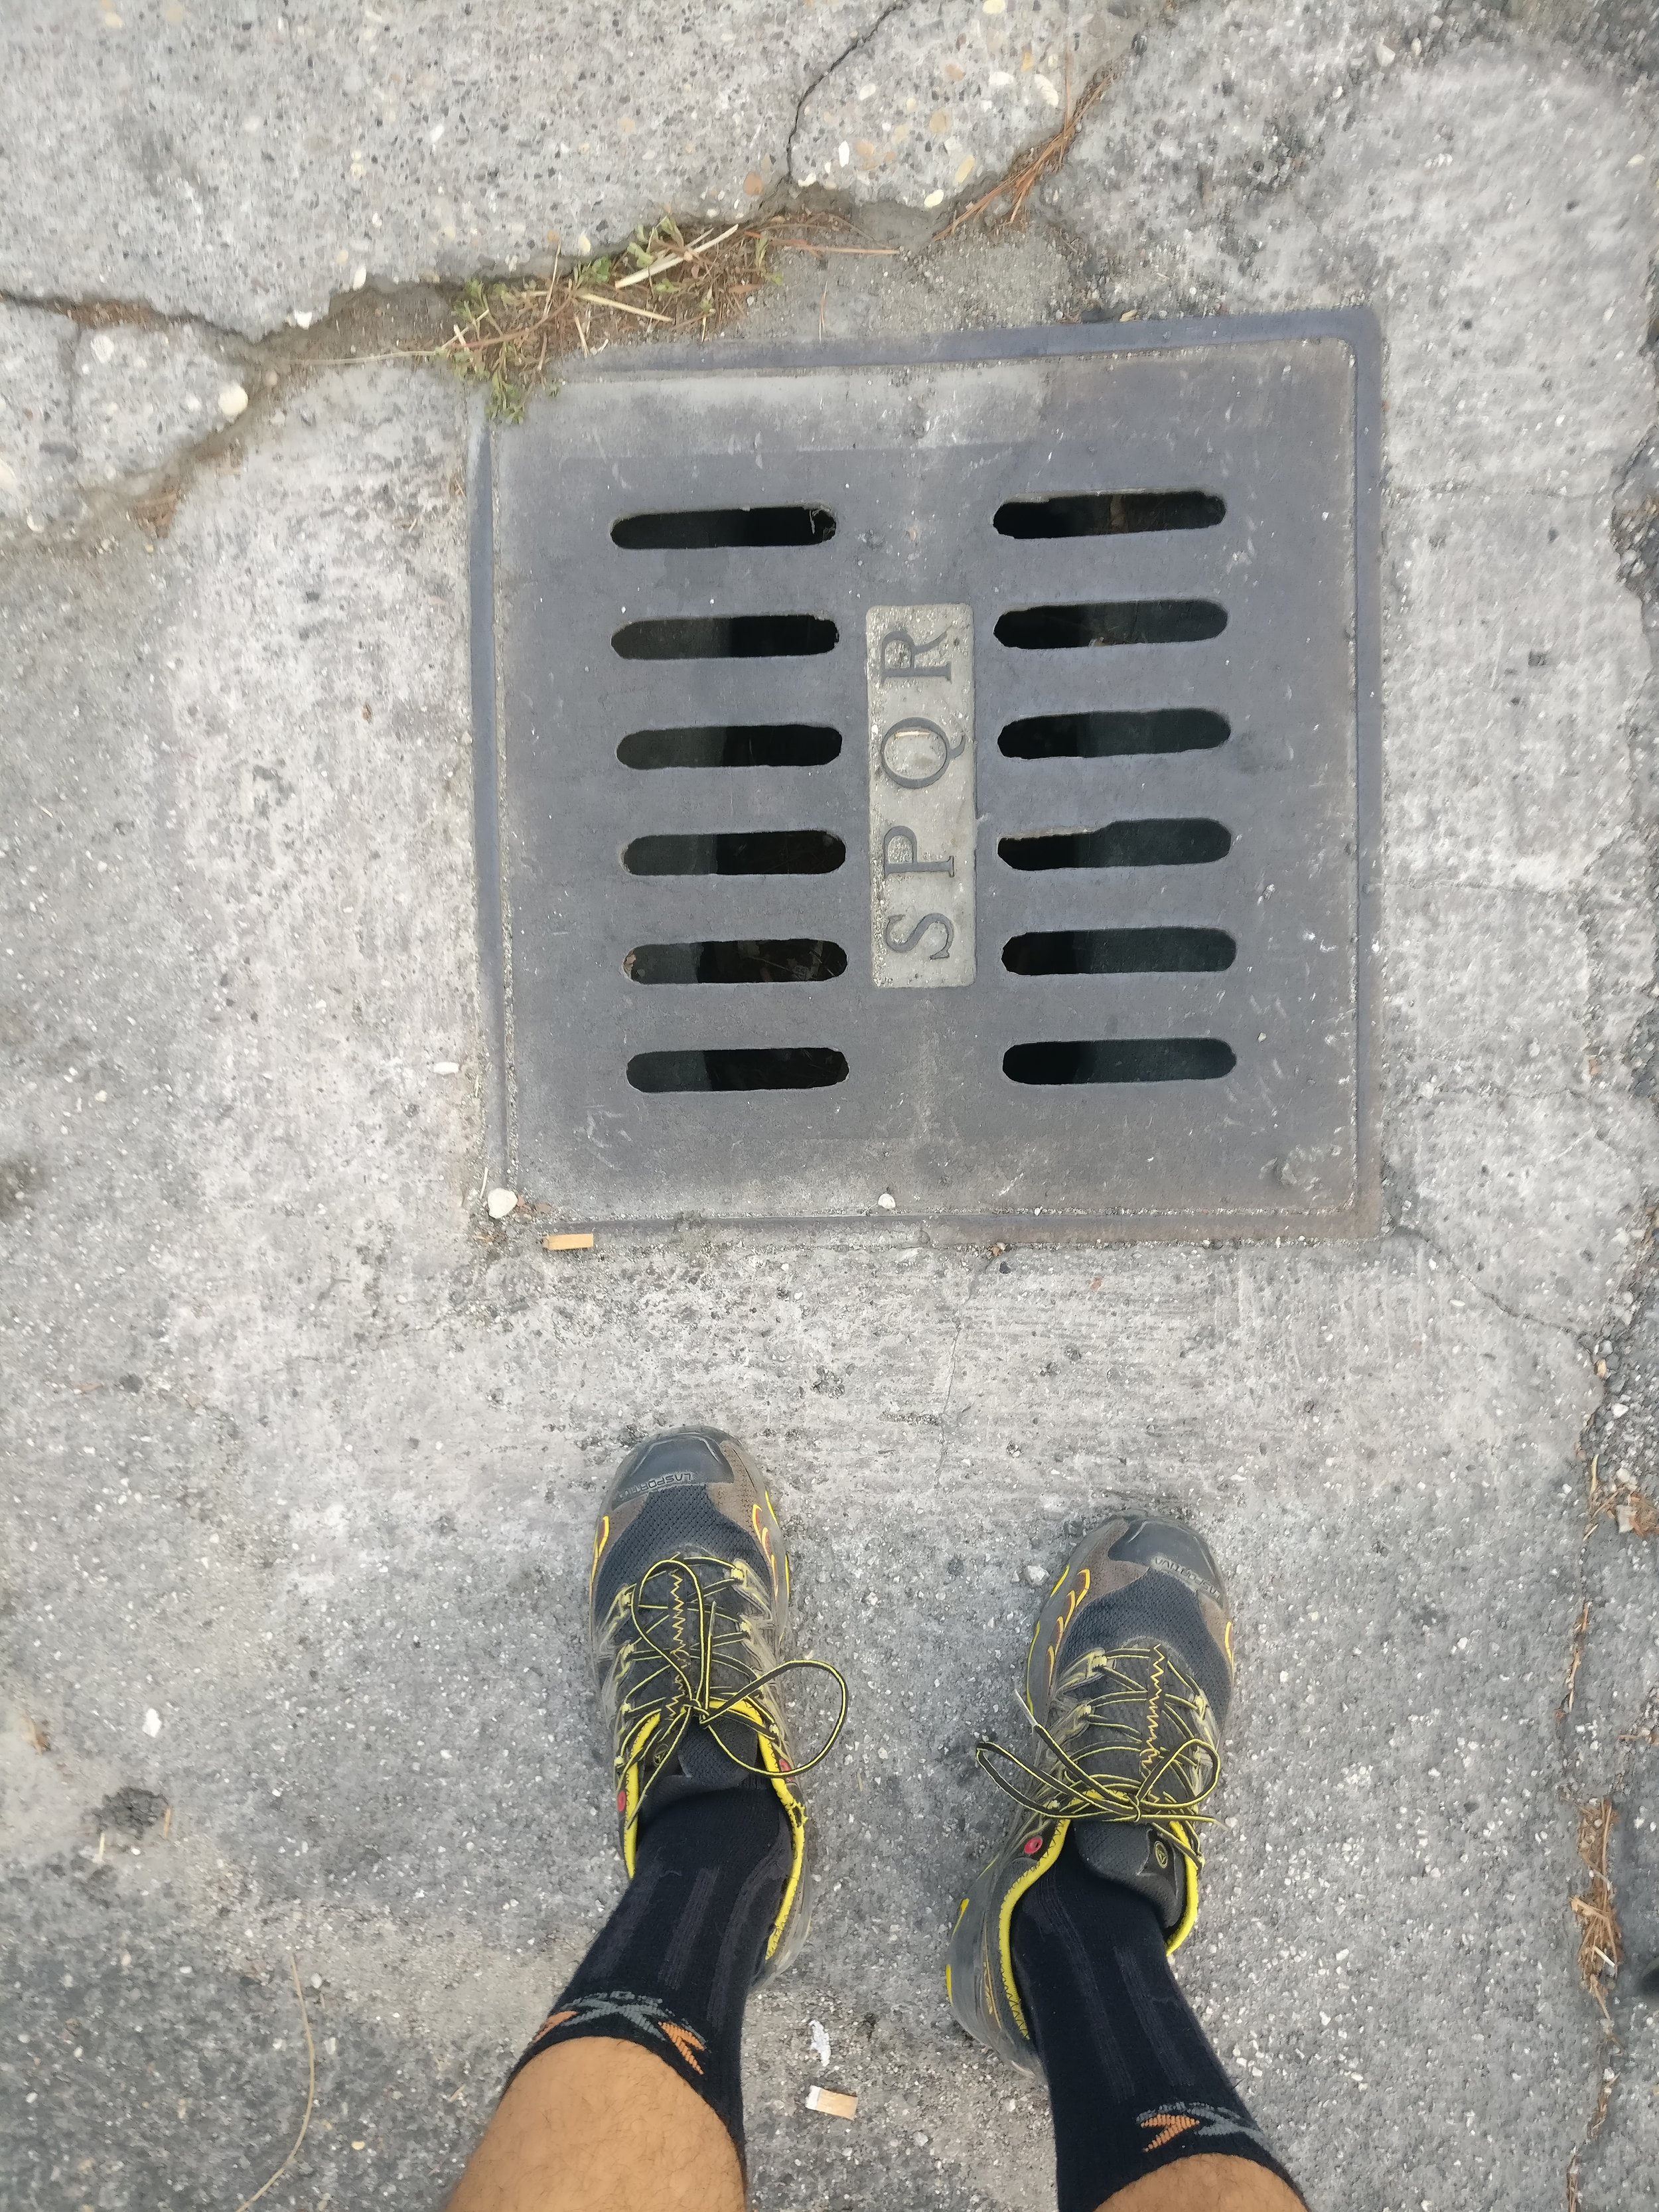  SPQR on the sewer coverings showed us we were coming to the end of our journey 